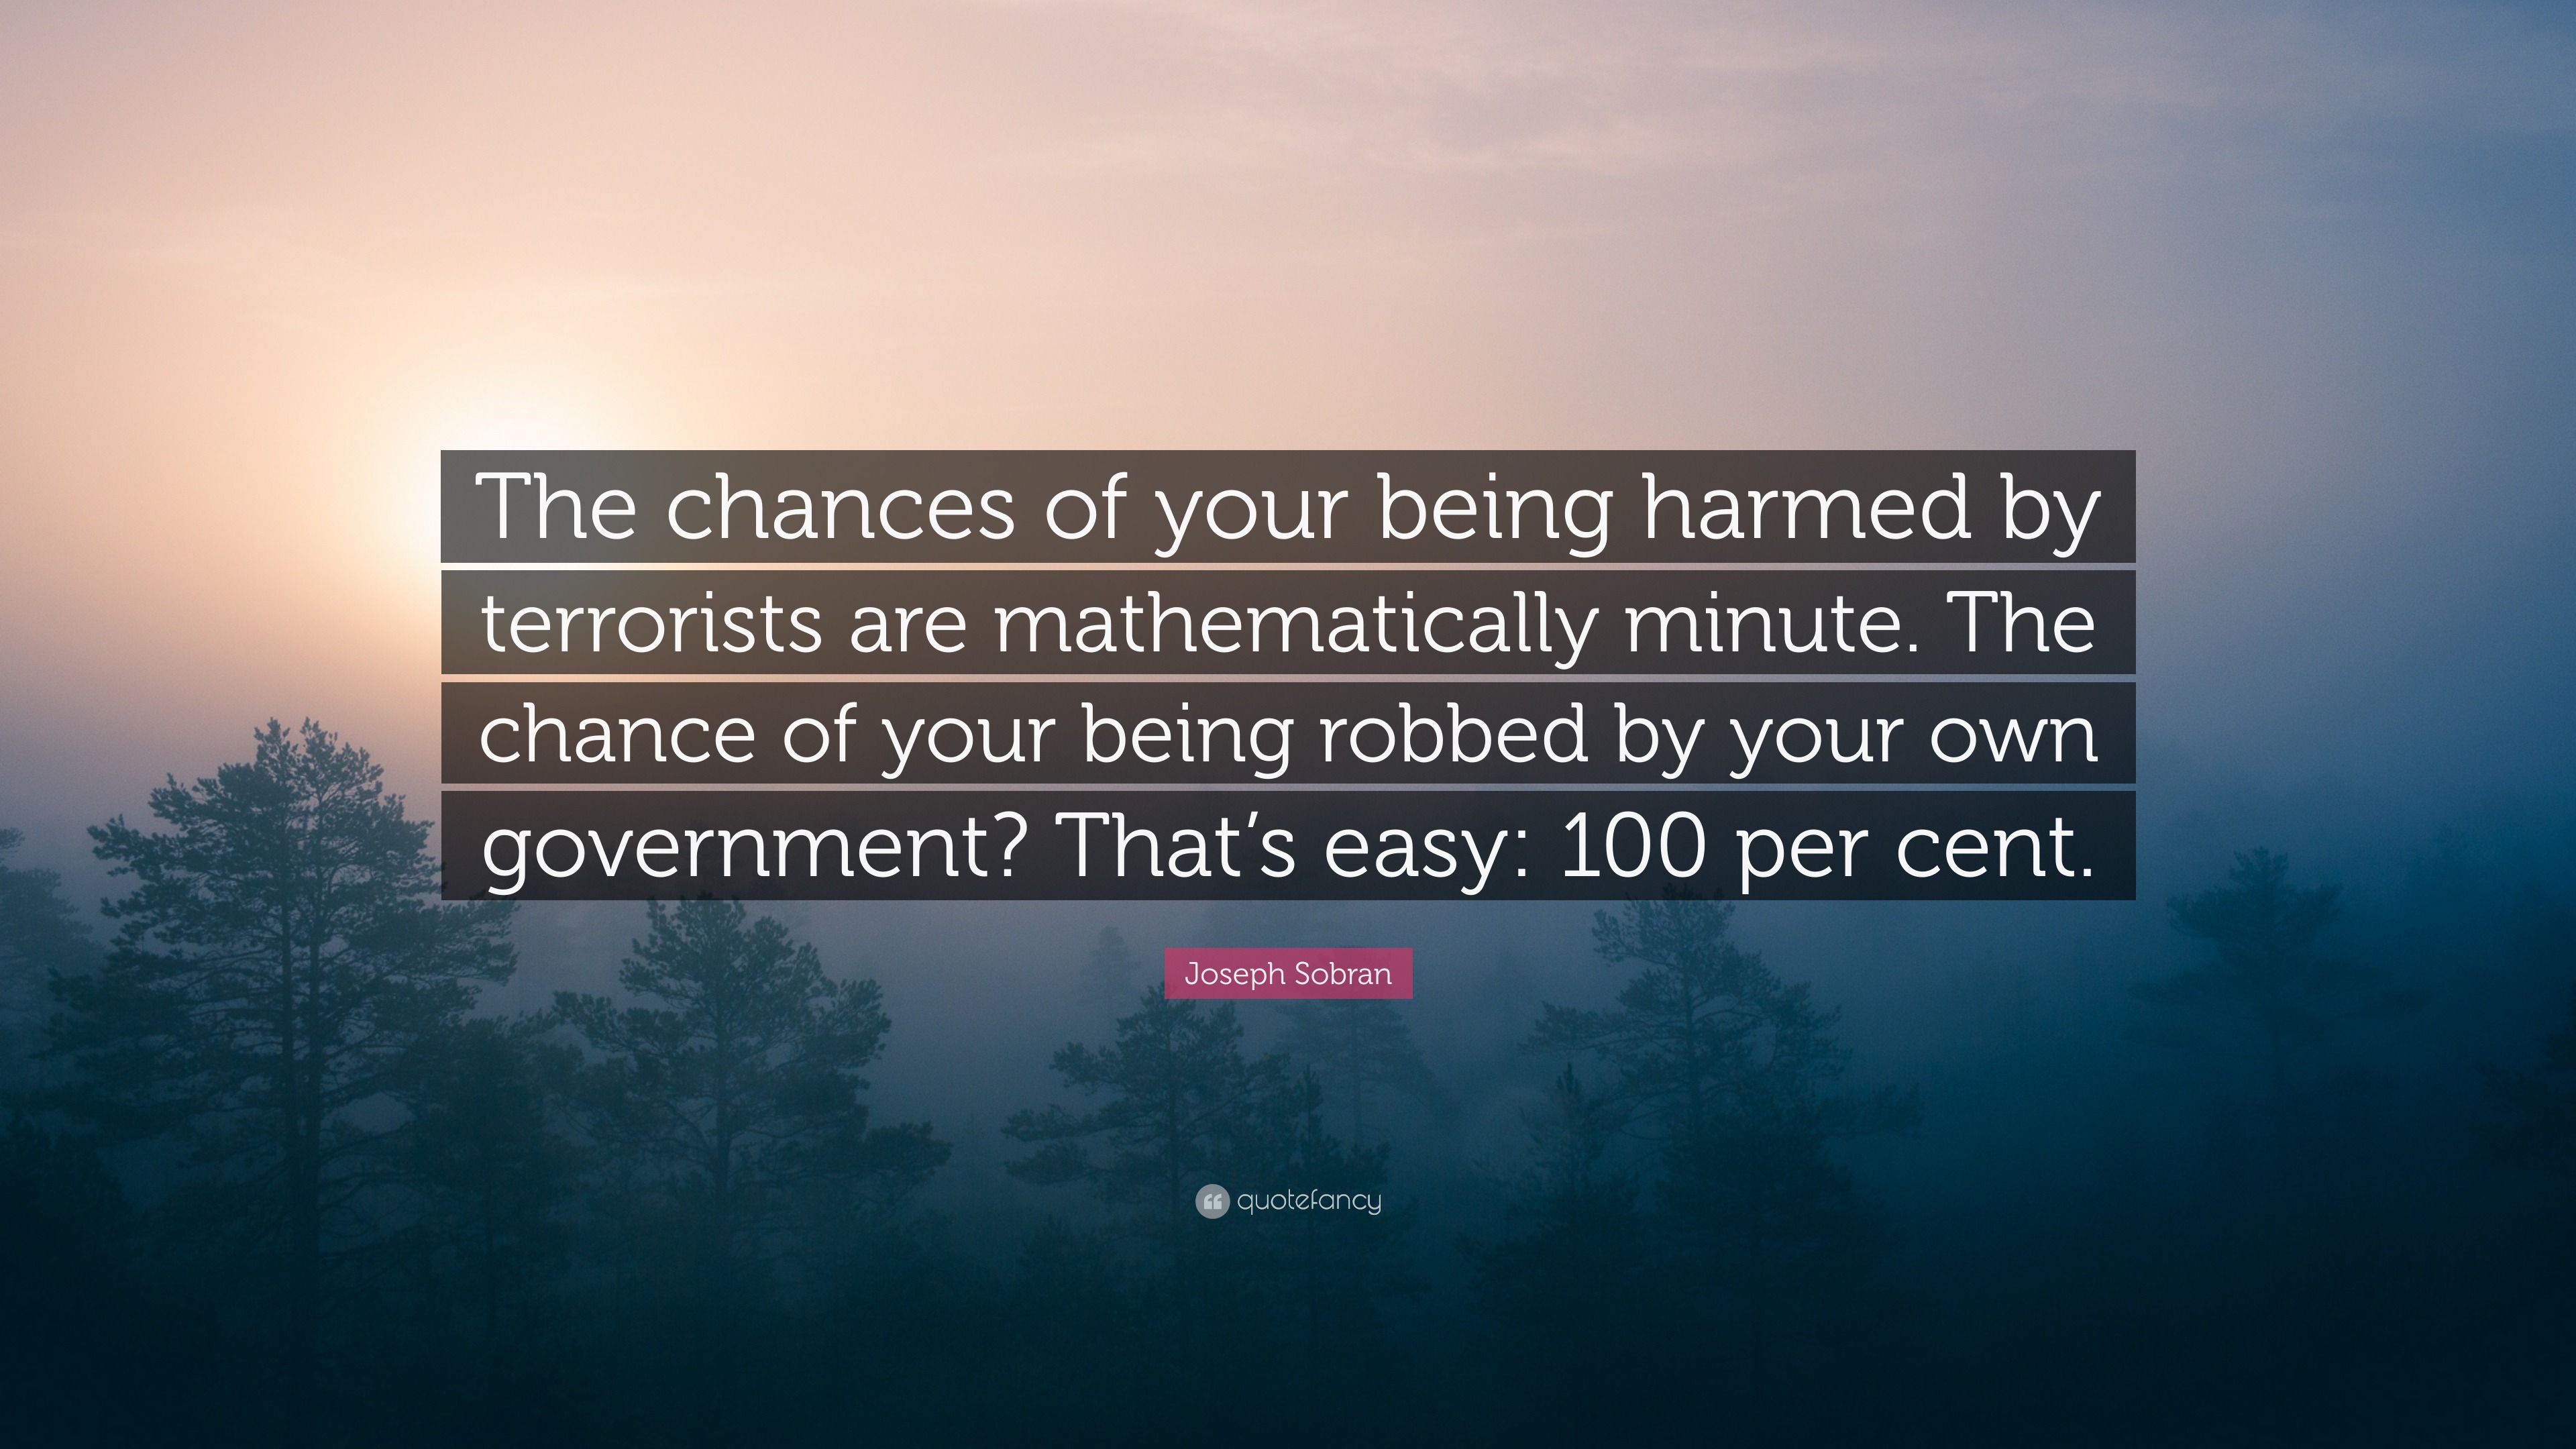 prevent Good feeling Scared to die Joseph Sobran Quote: “The chances of your being harmed by terrorists are  mathematically minute. The chance of your being robbed by your own go...”